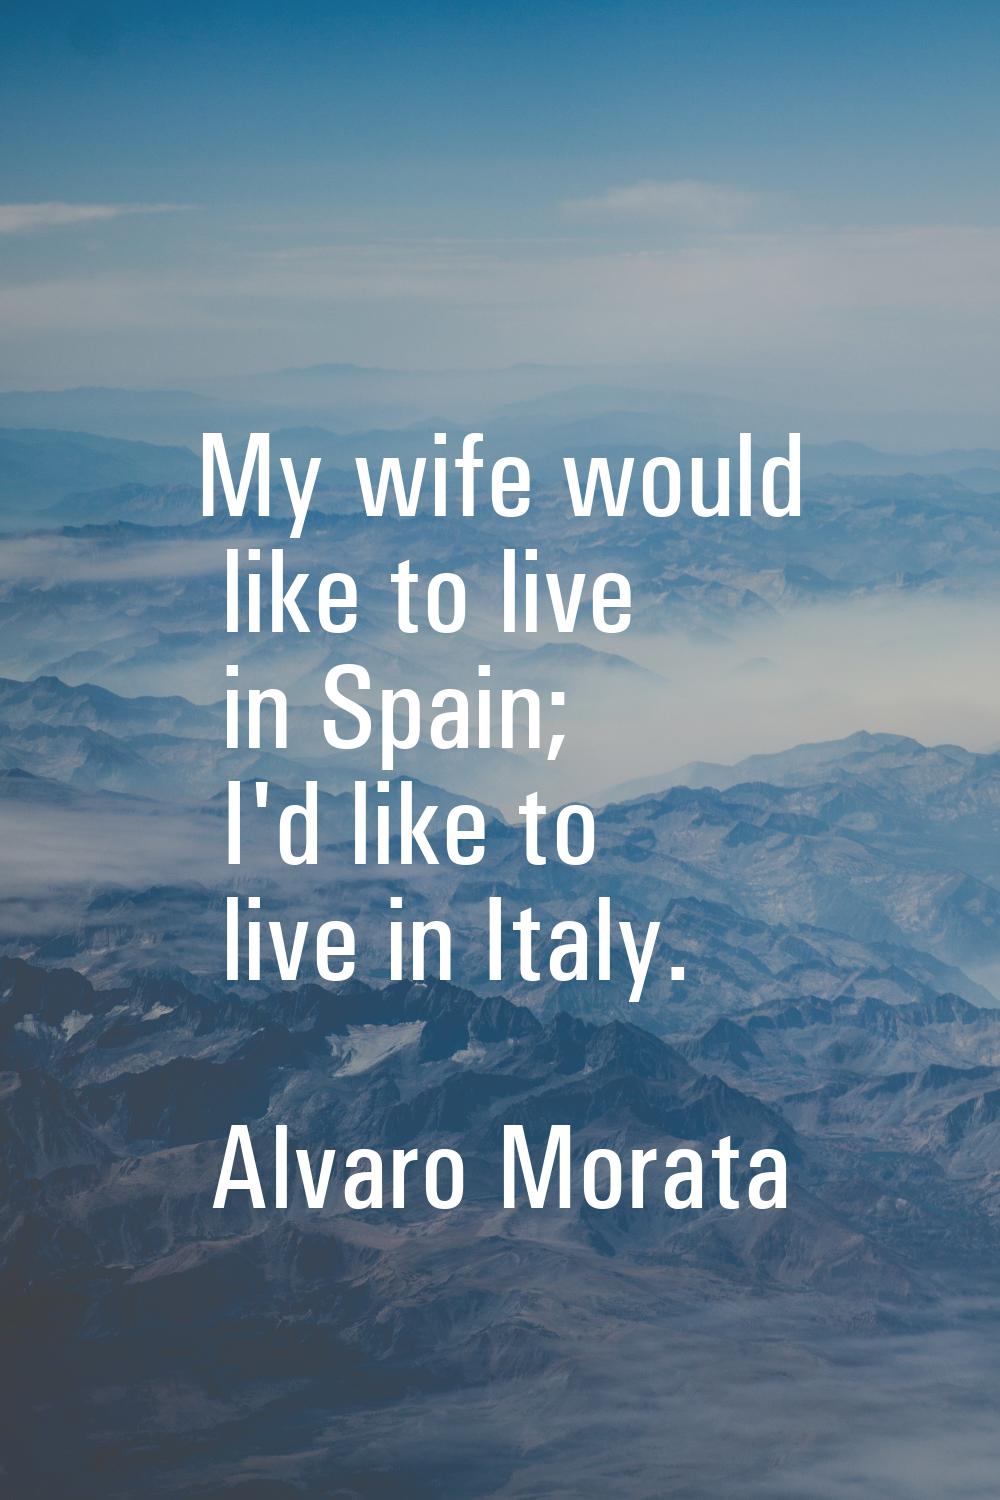 My wife would like to live in Spain; I'd like to live in Italy.